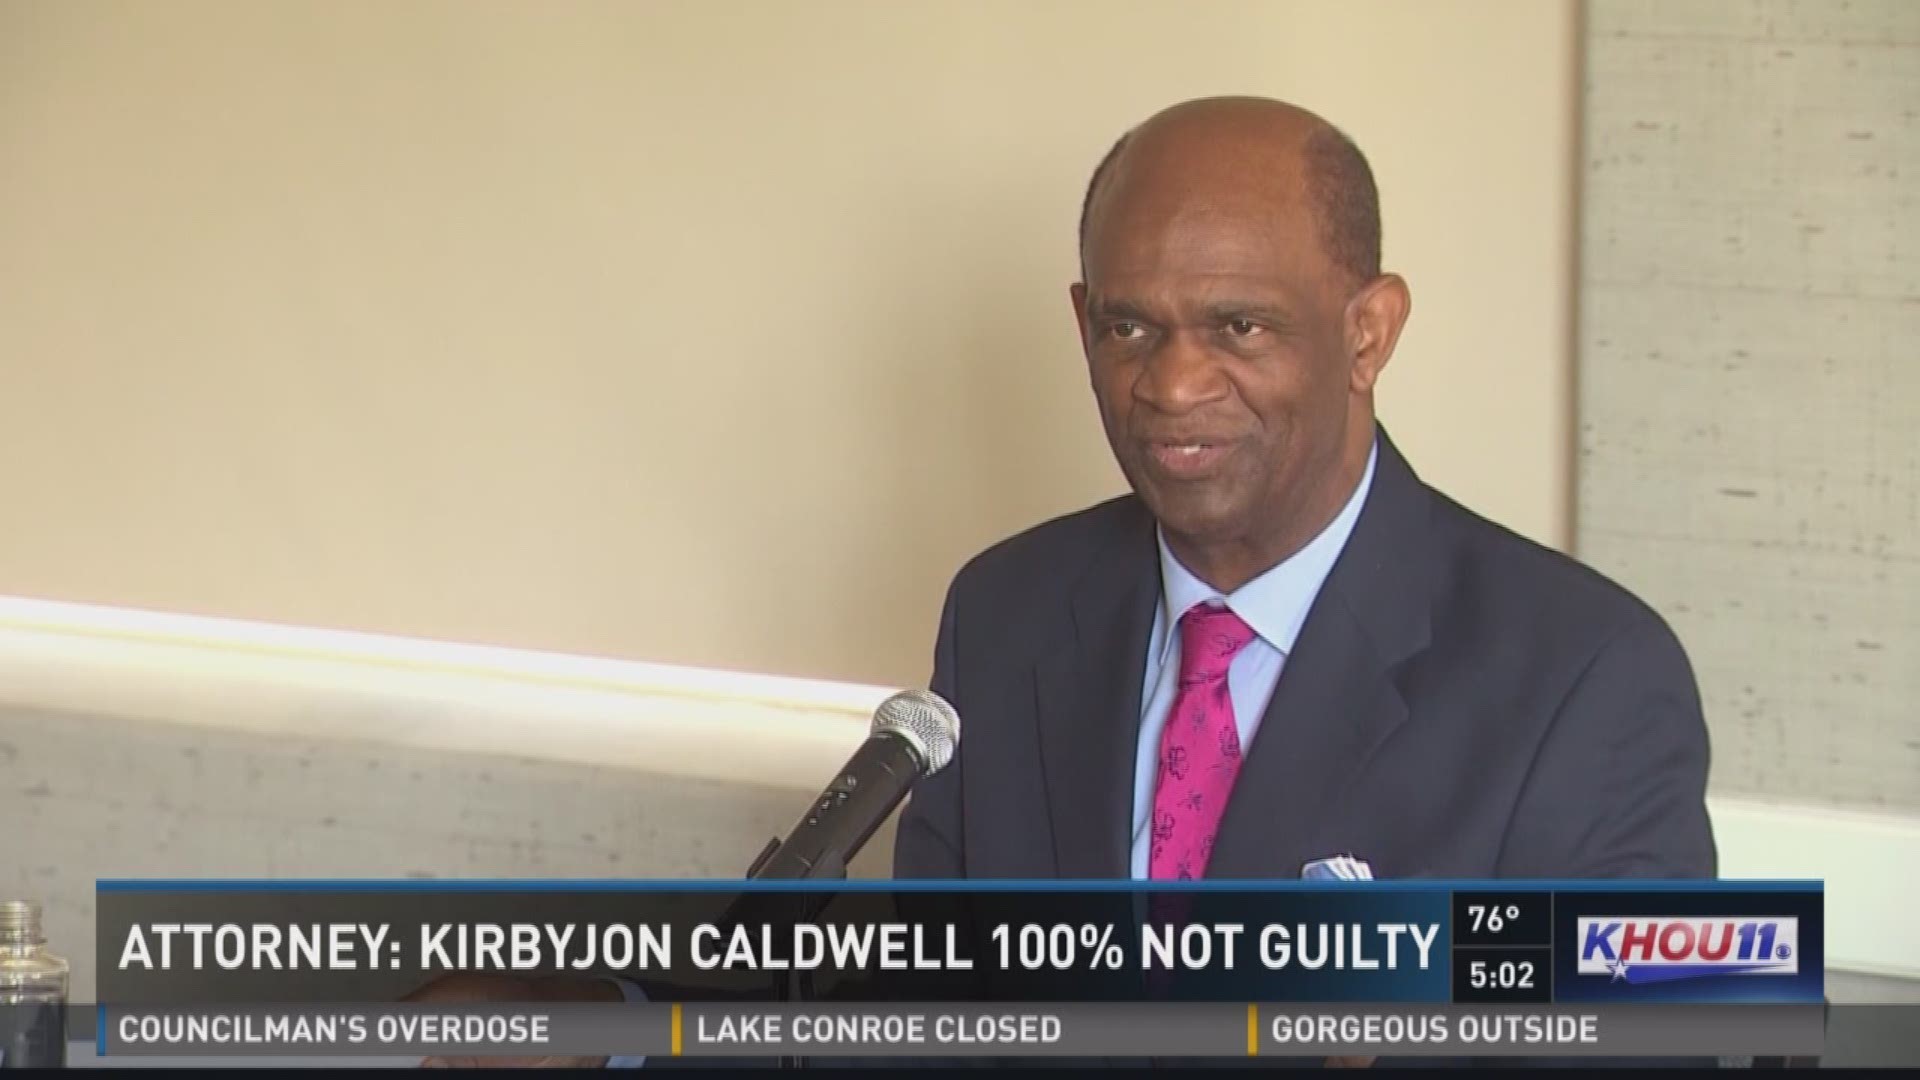 Prominent Houston pastor Kirbyjon H. Caldwell and his attorney responded Friday to accusations that he and a Louisiana financial planner defrauded investors of more than $1 million.